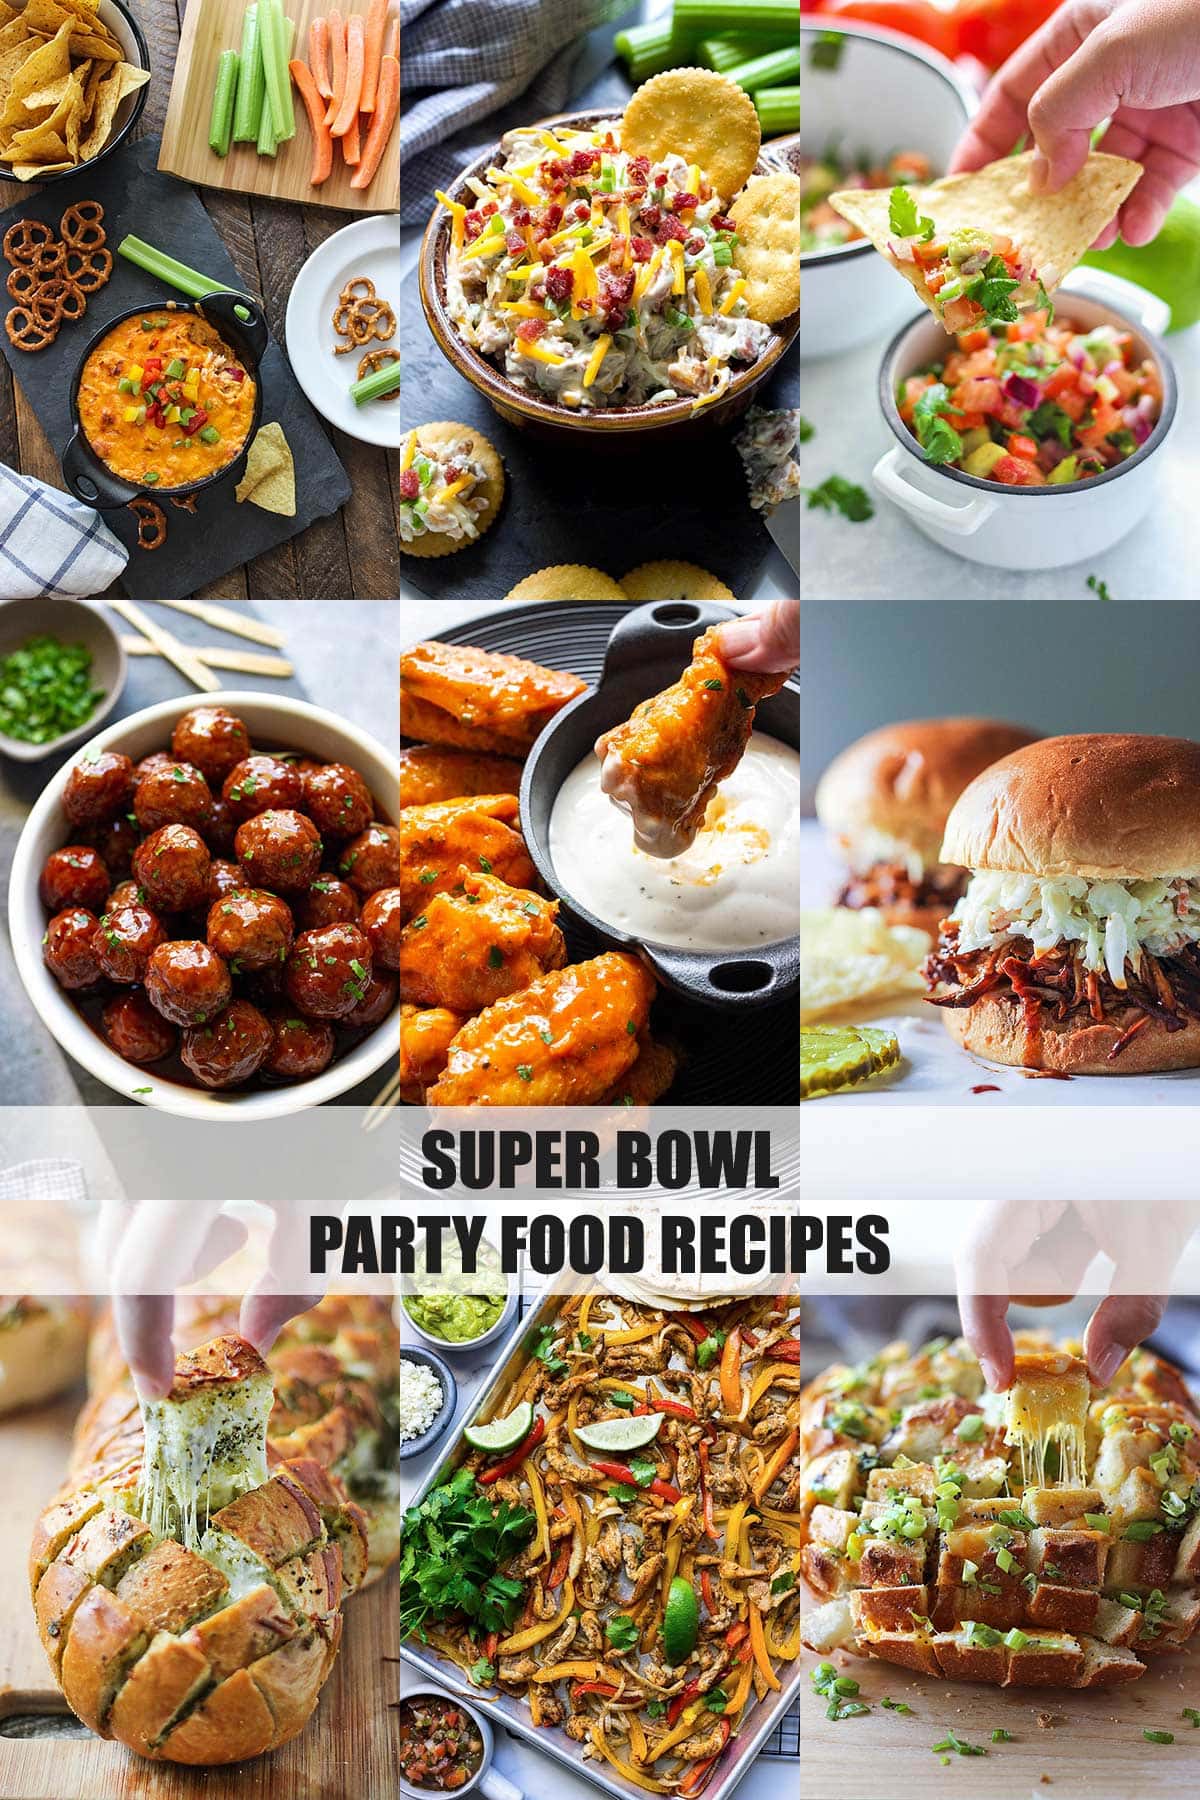 Nine food images of super bowl food recipes with dips, wings, breads and apps.